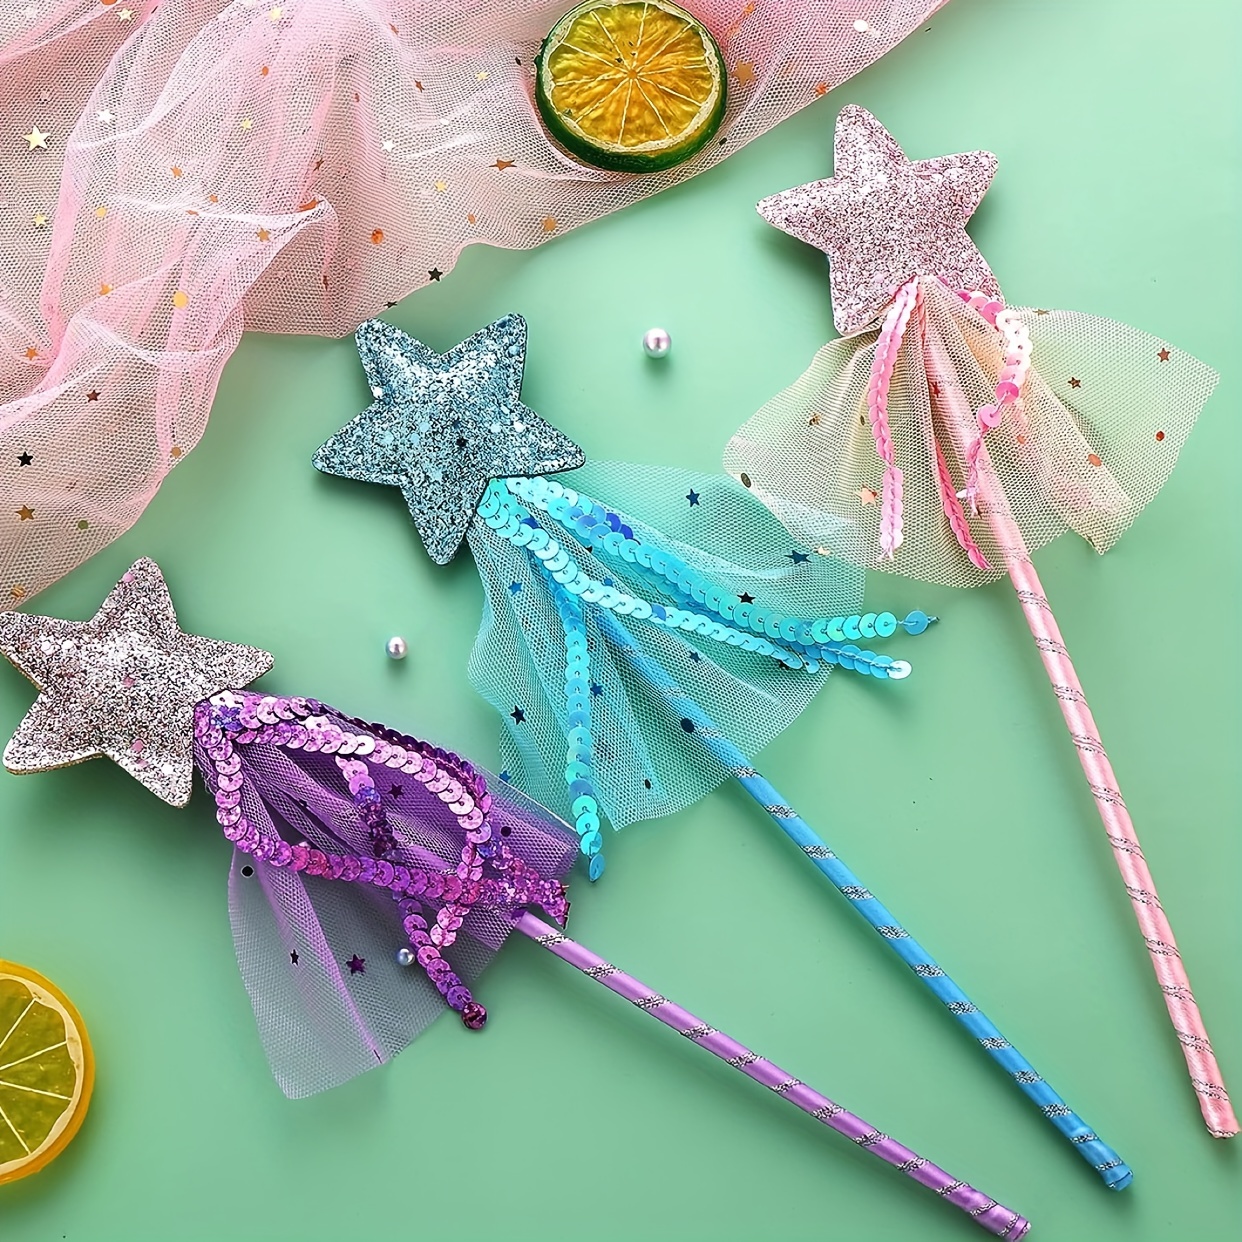 Fairy Glitter Magic Wand With Sequins Tassel Party Favor Kids Girls  Princess Dress Up Costume Scepter Role Play Birthday Holiday Gift Bag Filler  From Jessie06, $1.11